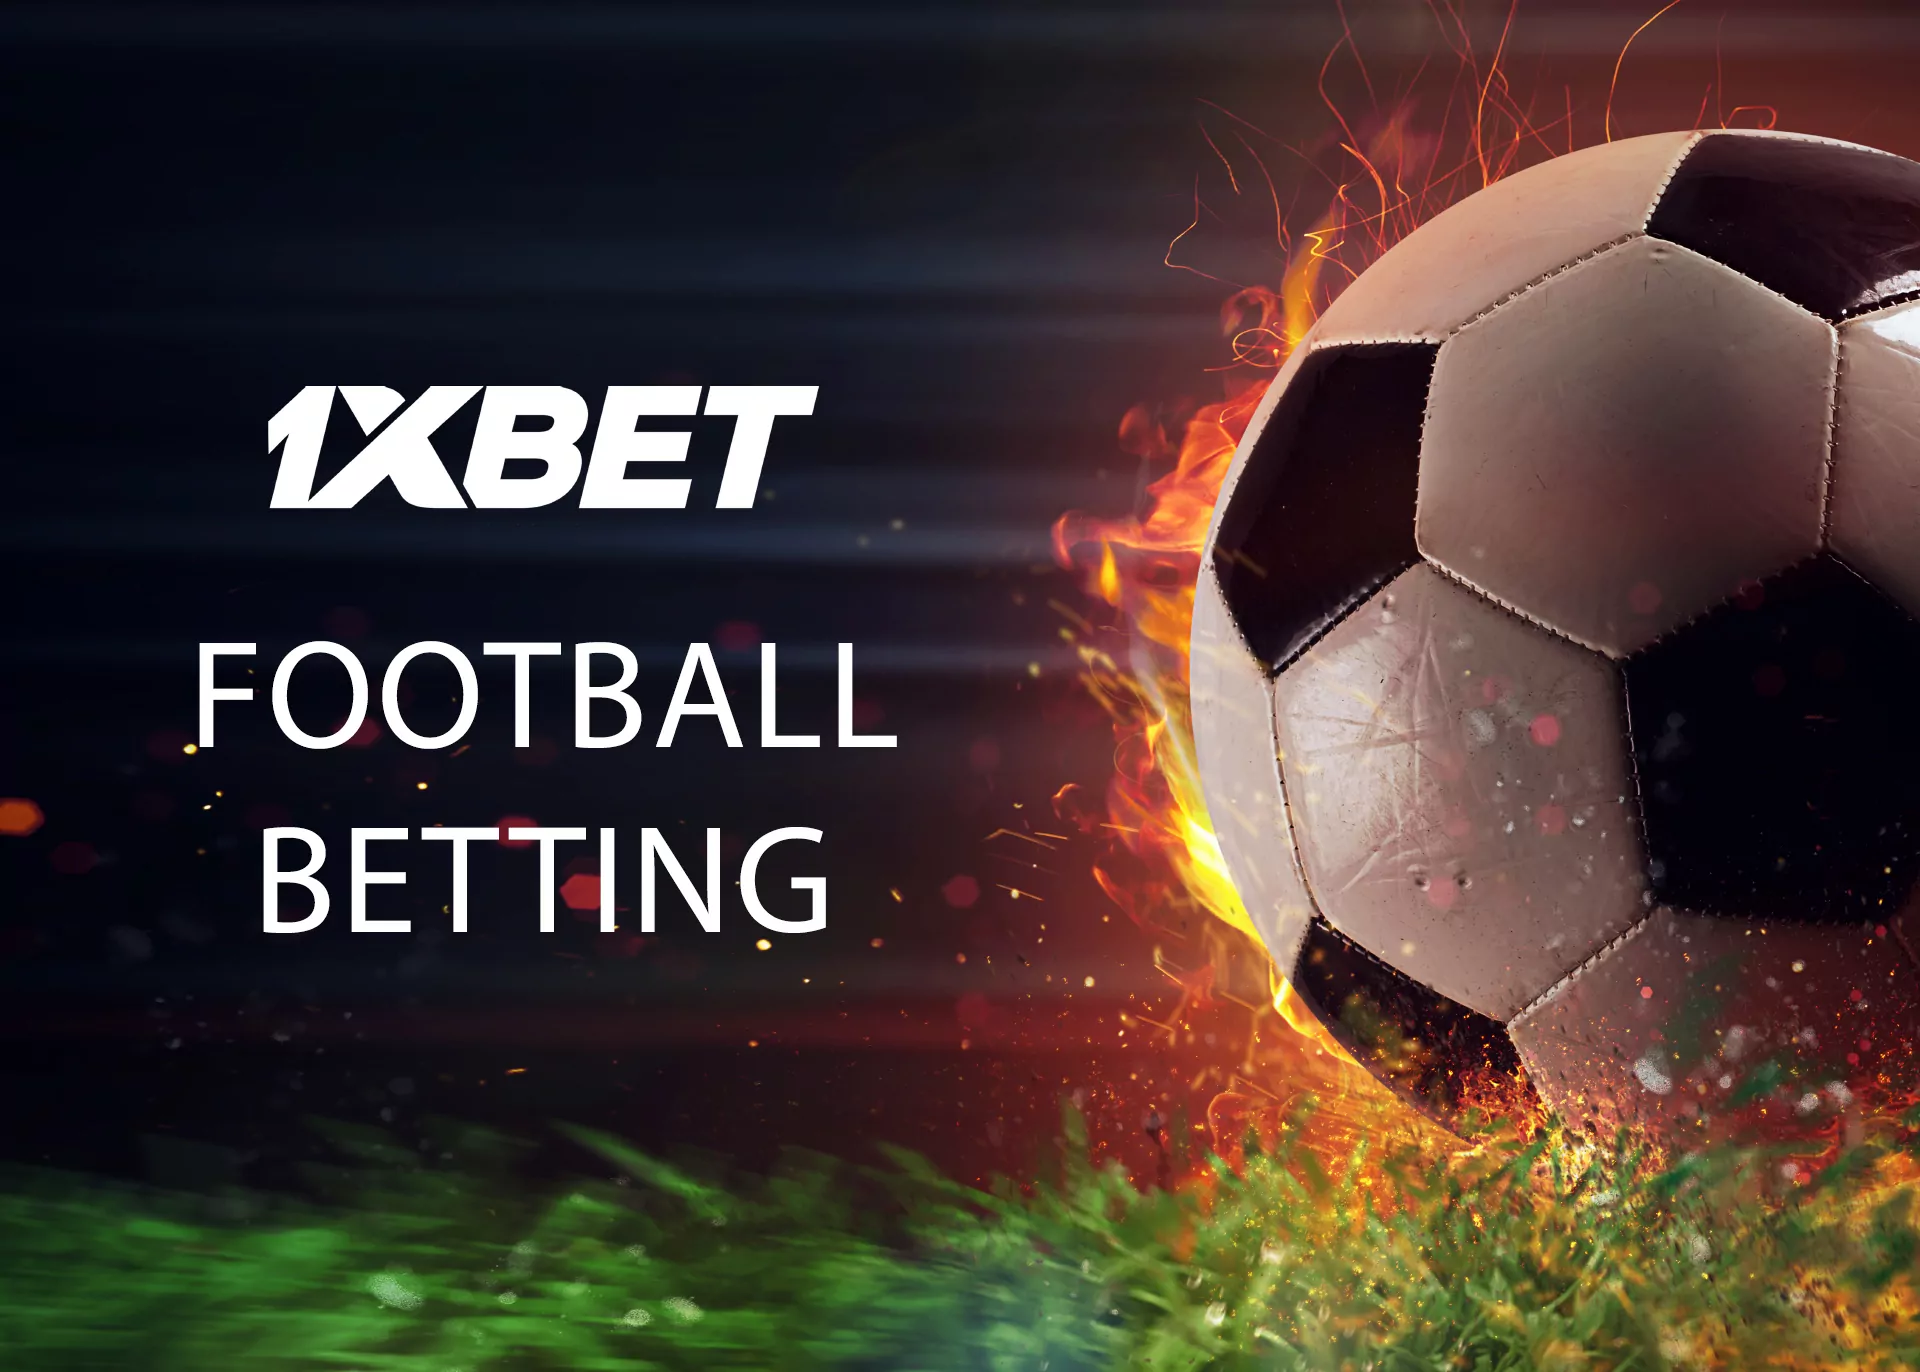 Football bets are available on the site and in the app 1xBet.